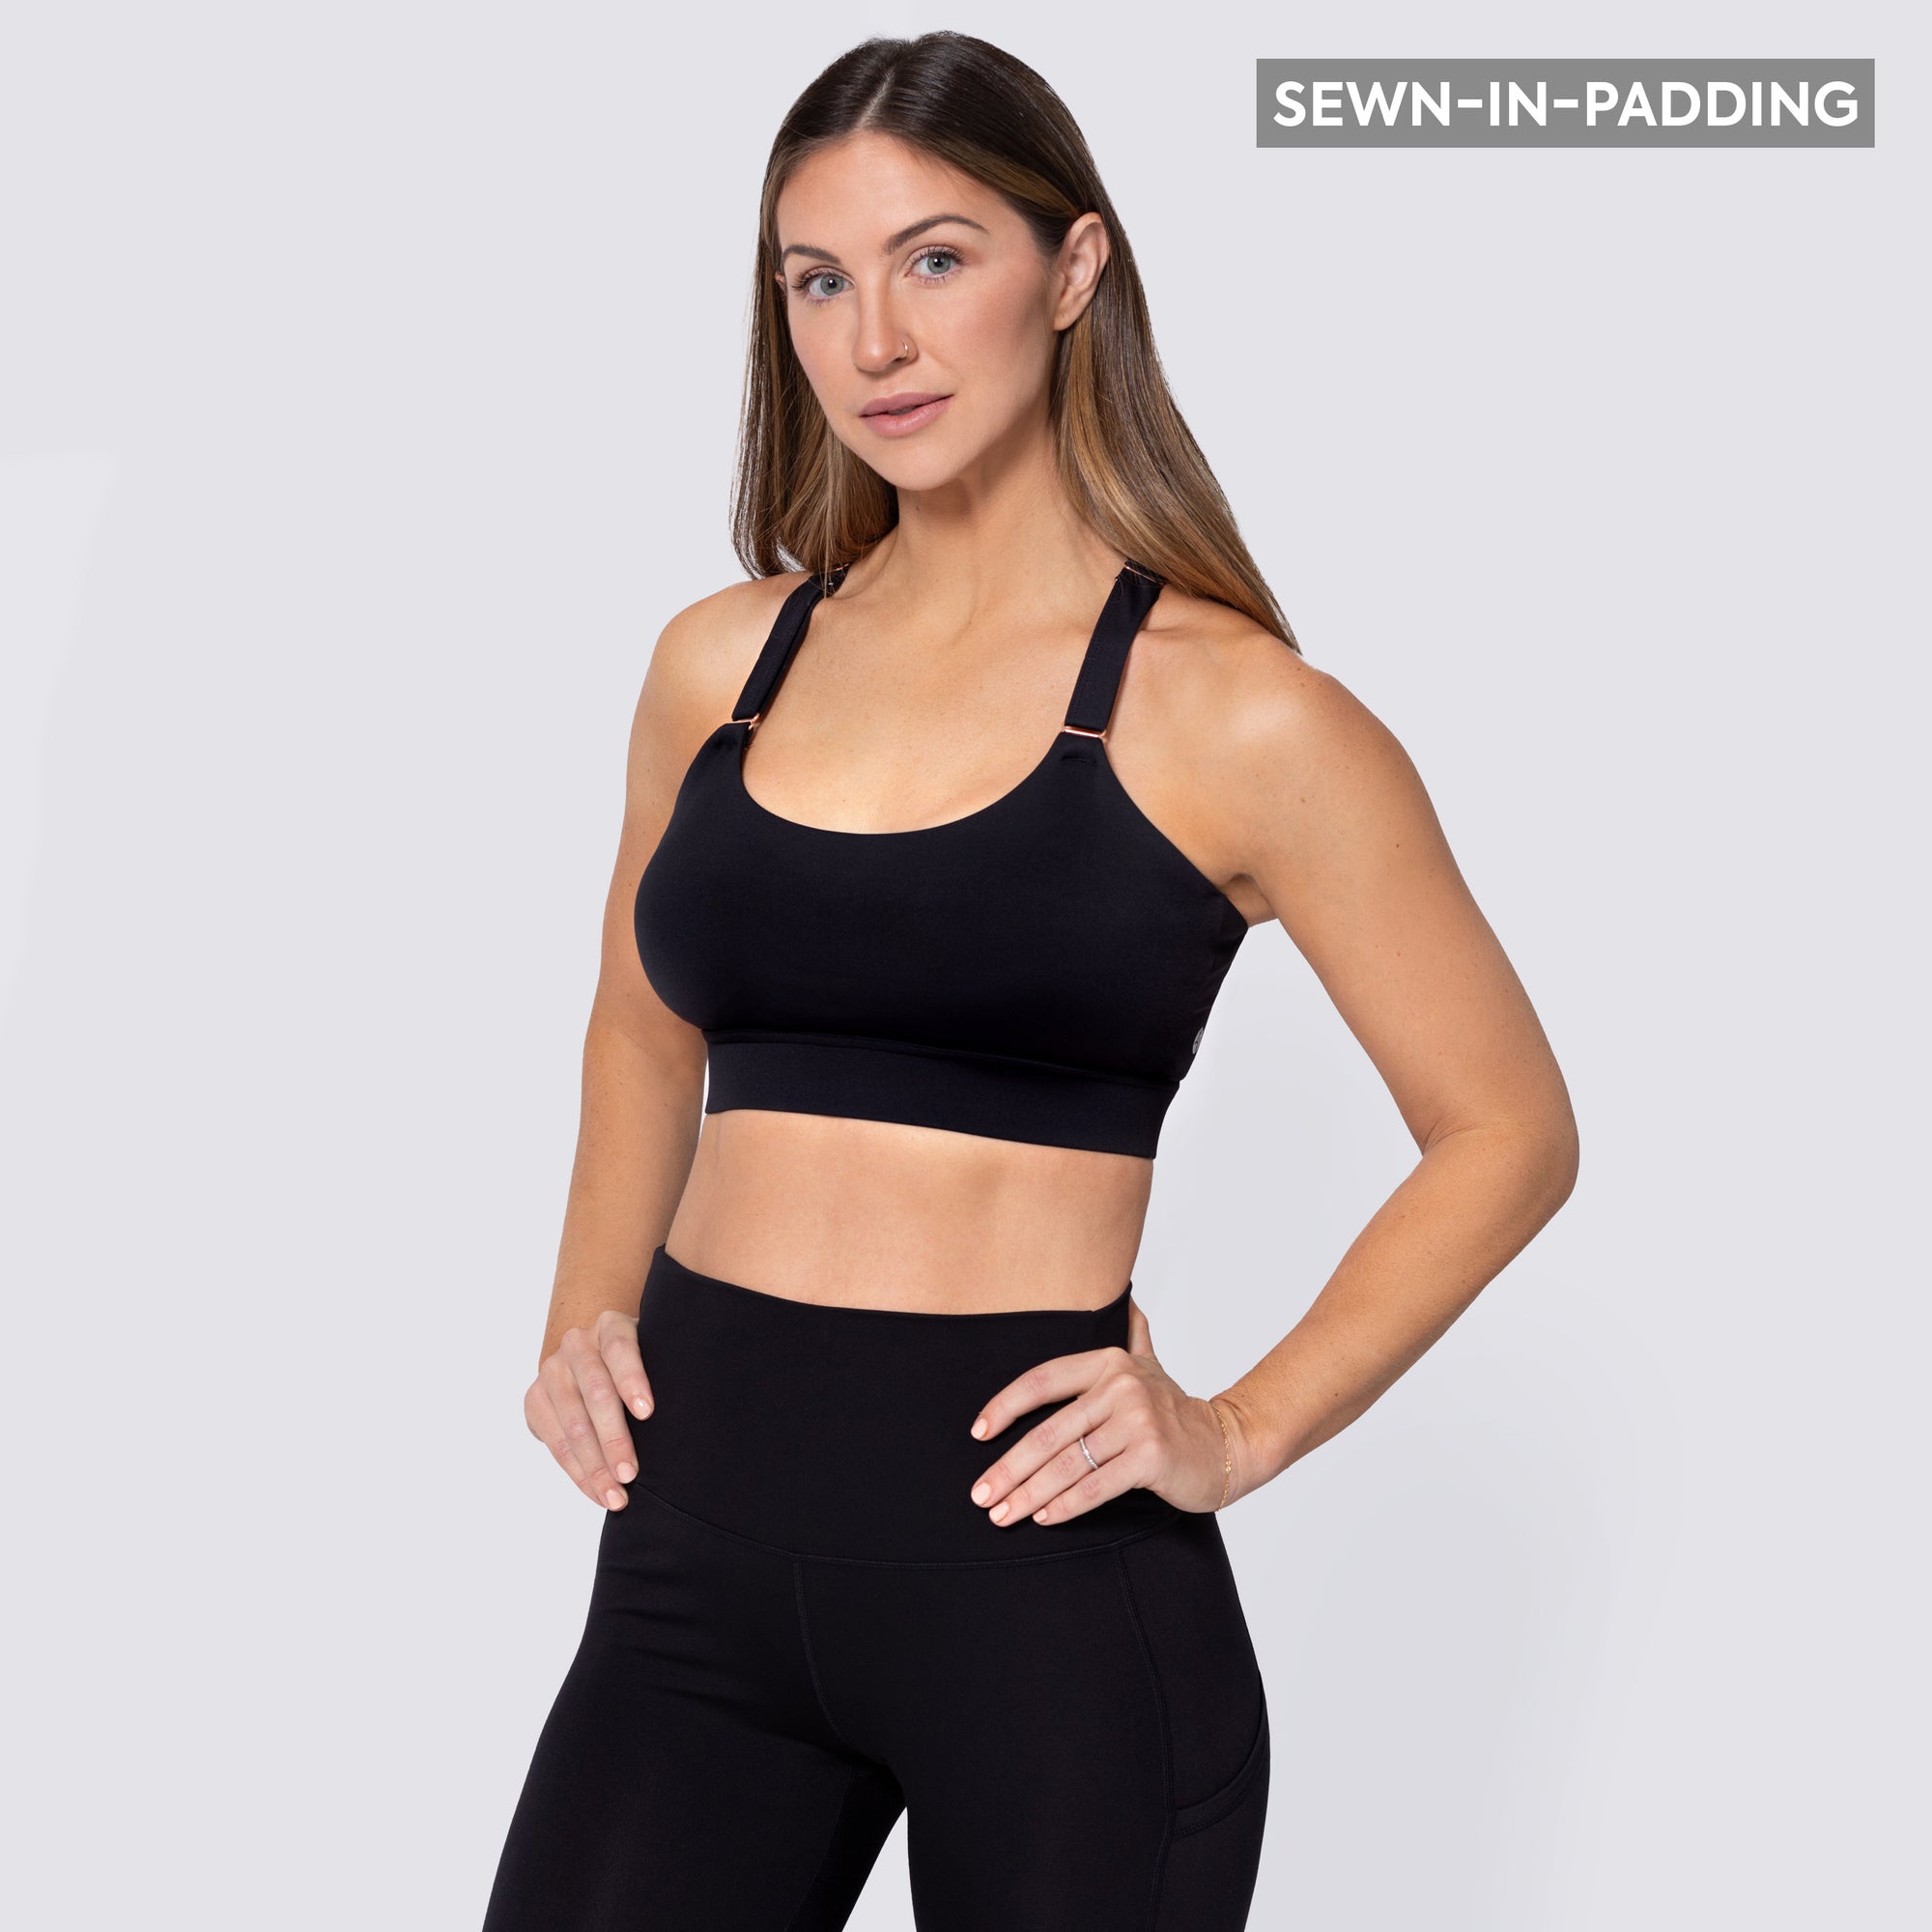 All In Motion Soft Strappy Black Sports Bra Size M - $8 (50% Off Retail) -  From Jan